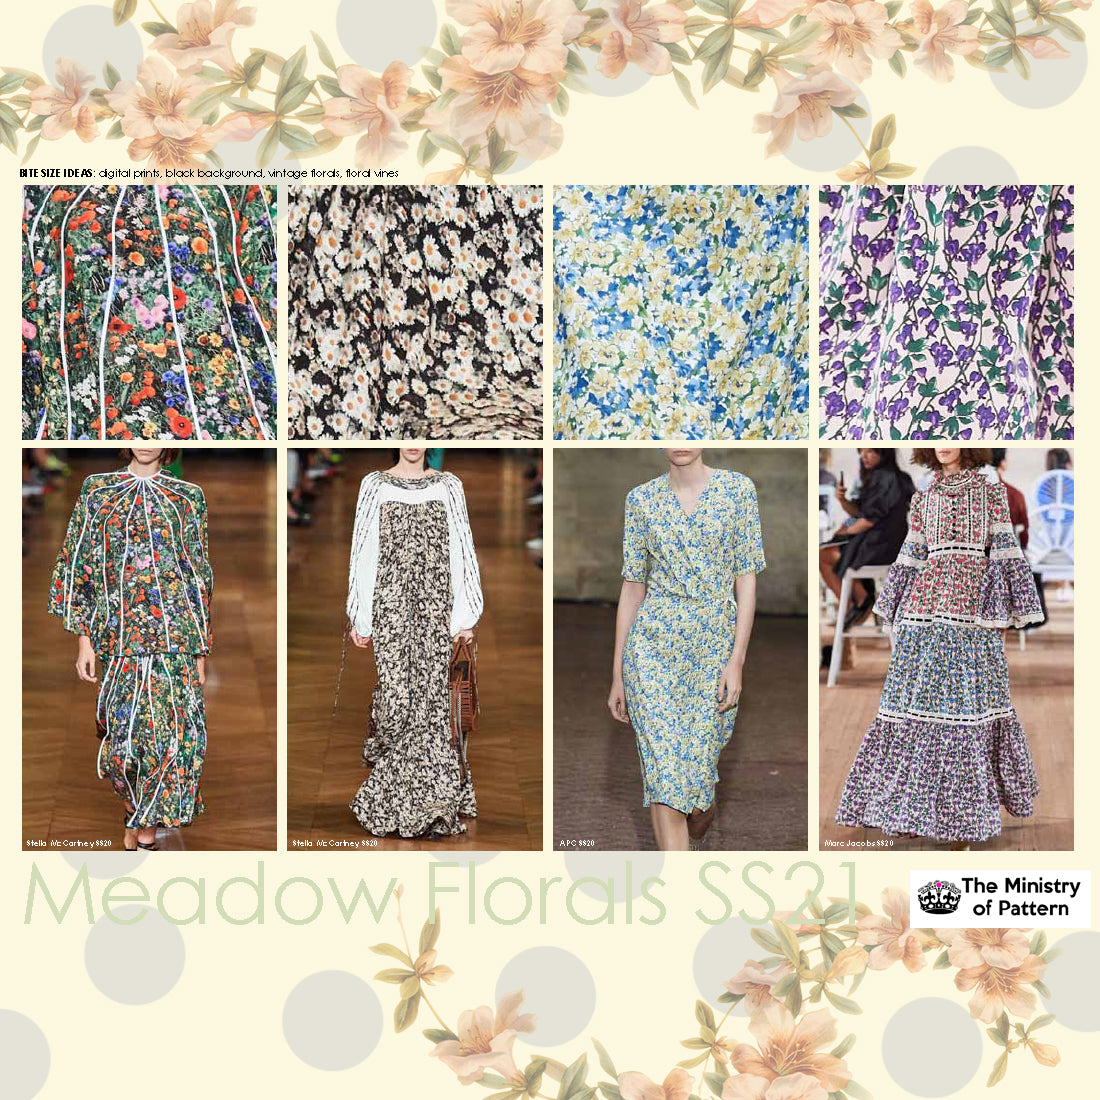 Meadow Florals SS21